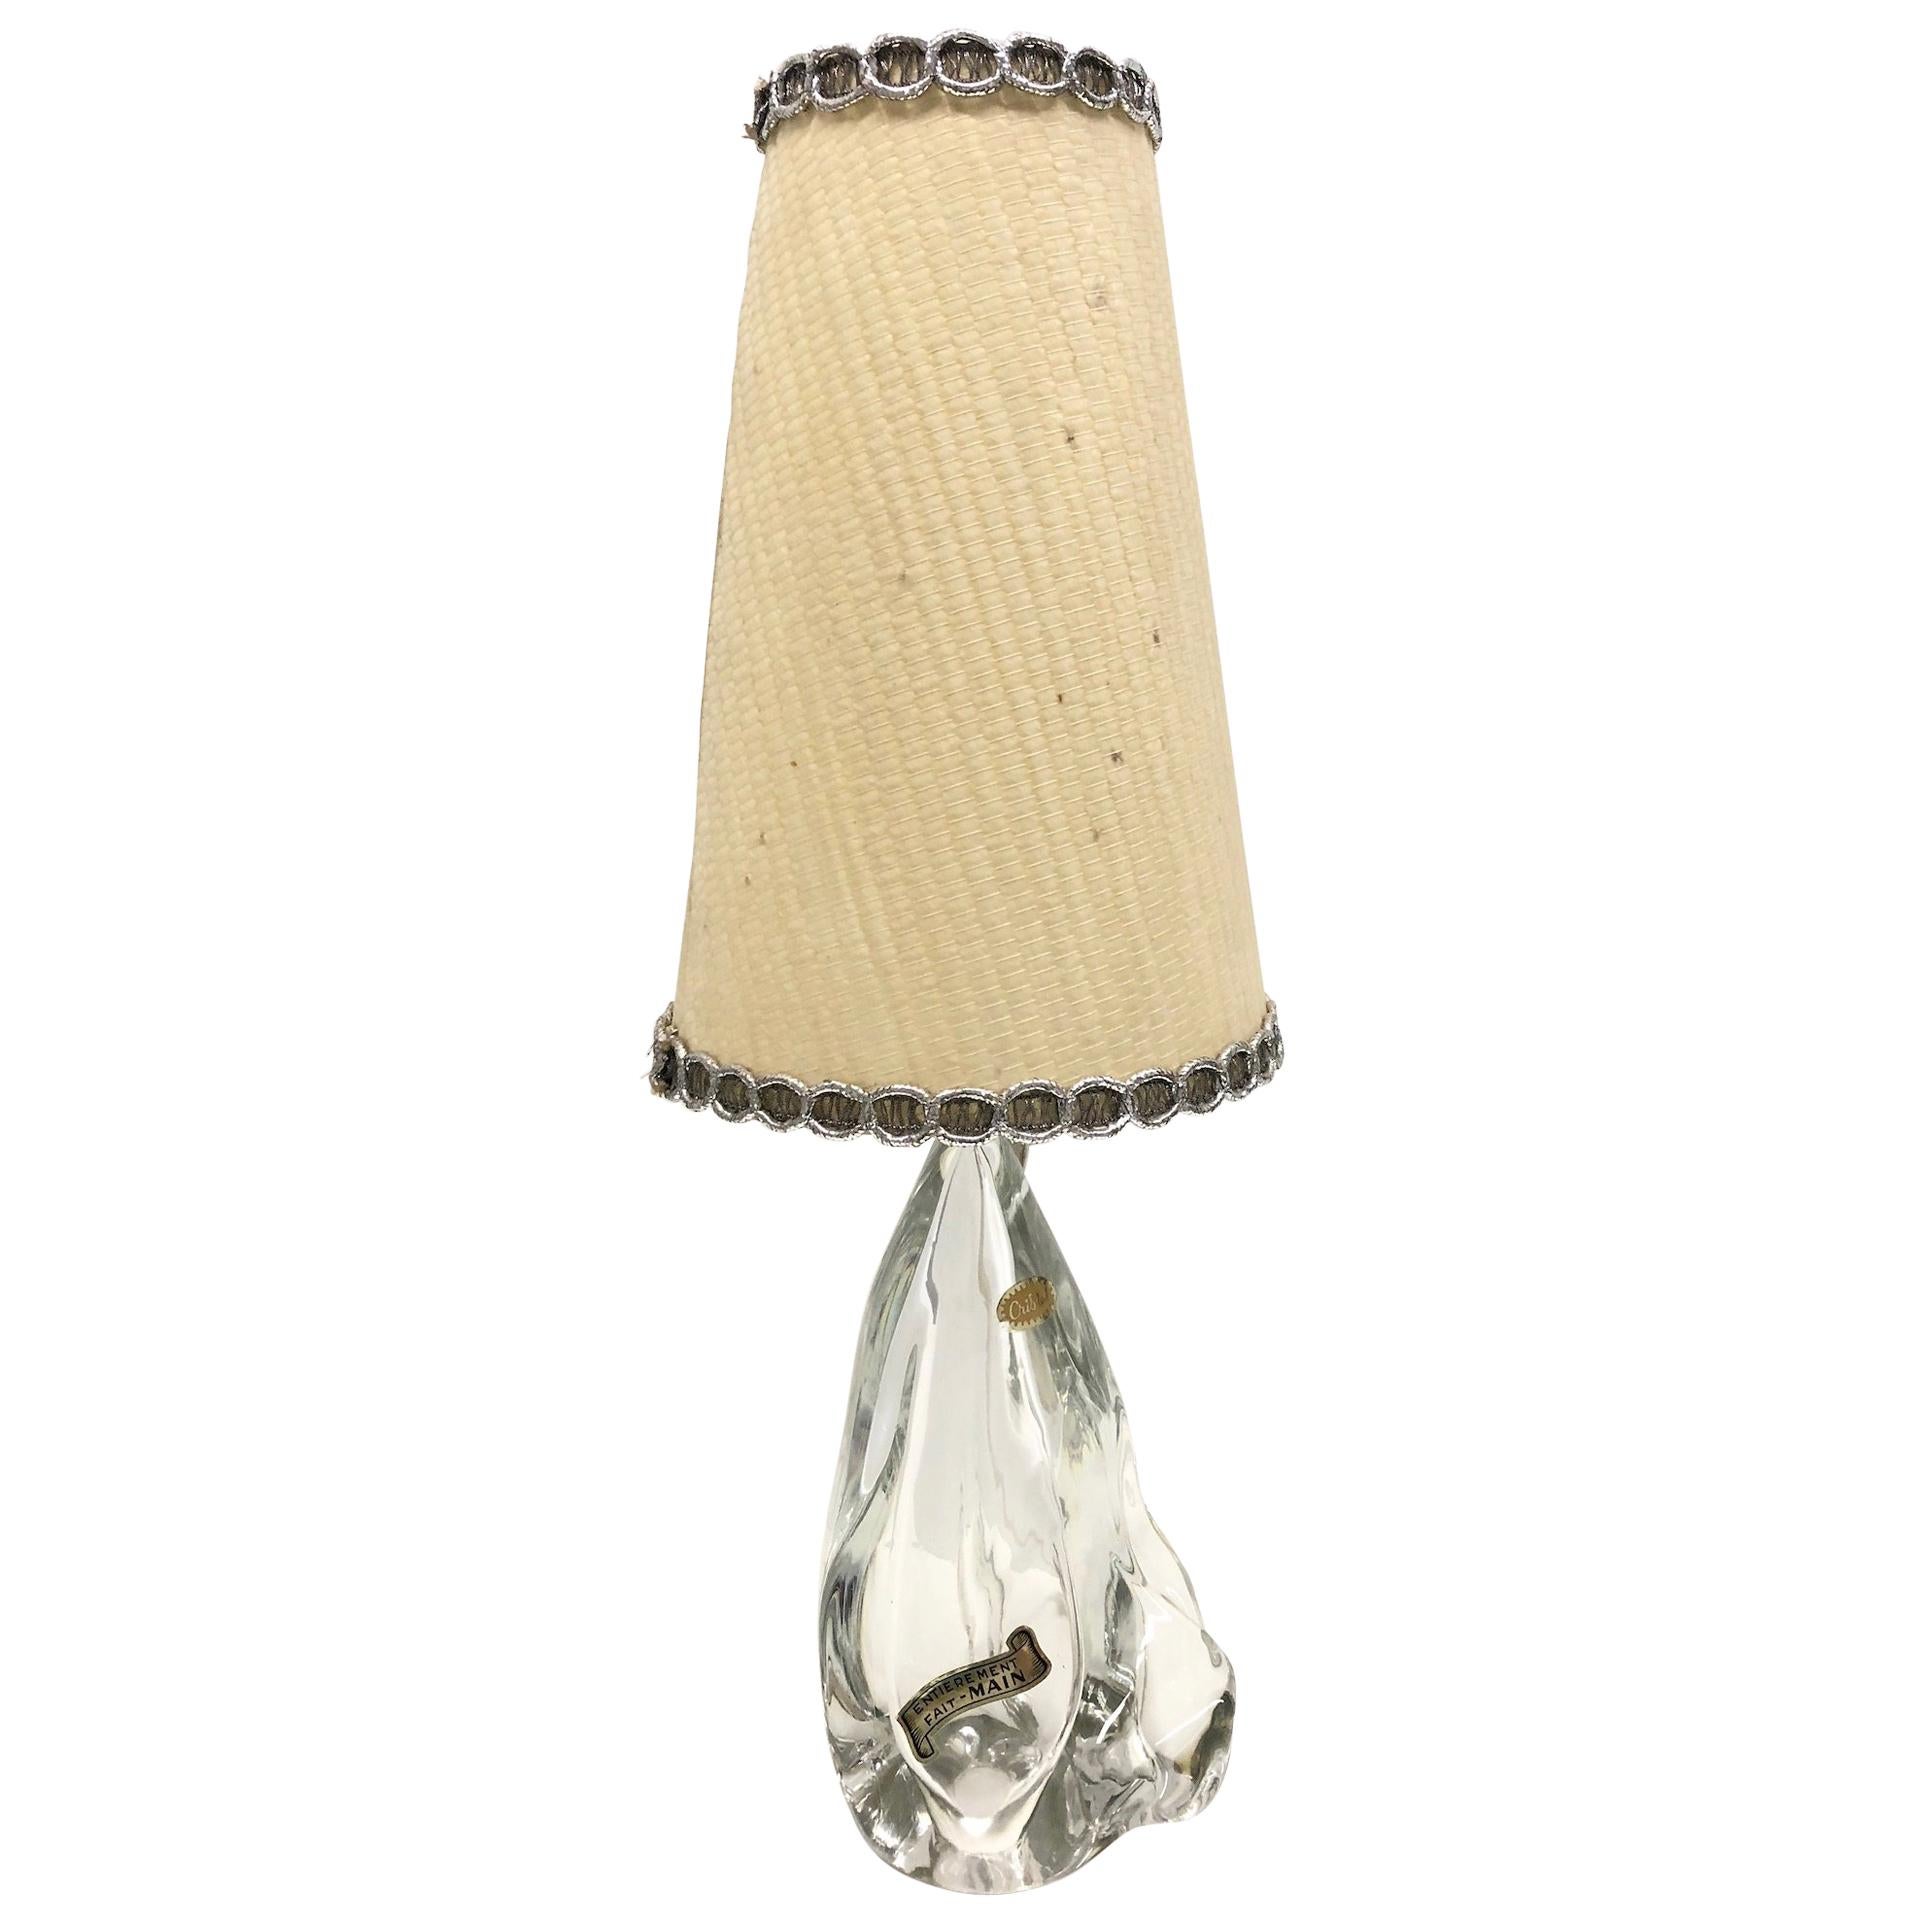 Iconic Midcentury Clear Crystal Glass Table Lamp in Style of a Mountain Rock For Sale